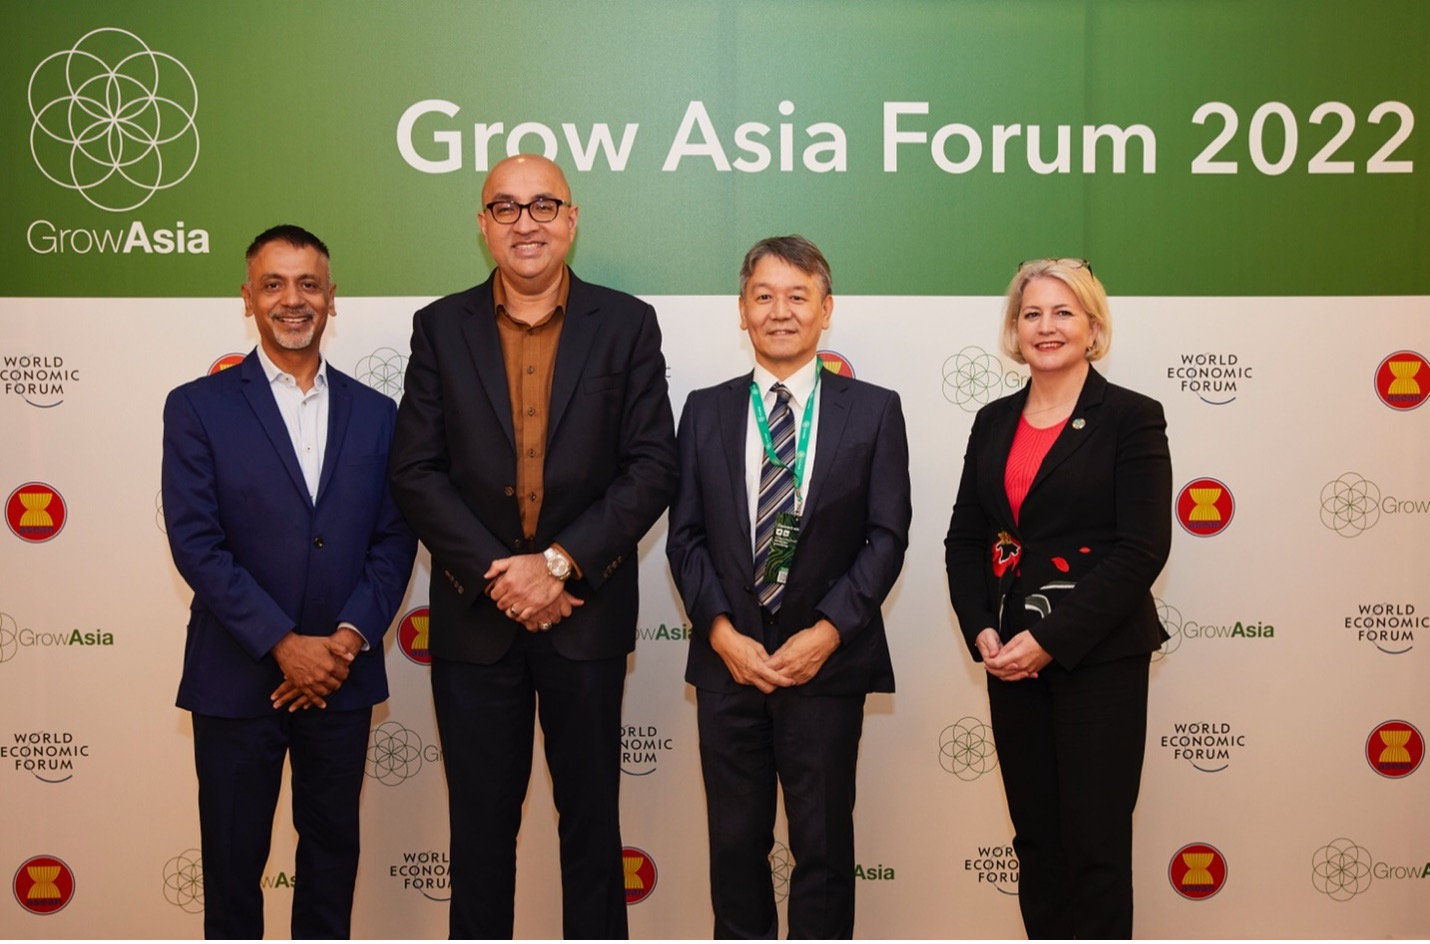 Pictured (left to right): Colin D’Silva, Vice President Government Relations Asia Pacific, Cargill; H.E. Satvinder Singh, Deputy Secretary-General for the ASEAN Economic Community; H.E. Takahashi Yoshiaki, Deputy Chief of Mission and Chargé d‘Affaires ad Interim, Embassy of Japan in Singapore; Beverley Postma, Executive Director at Grow Asia.